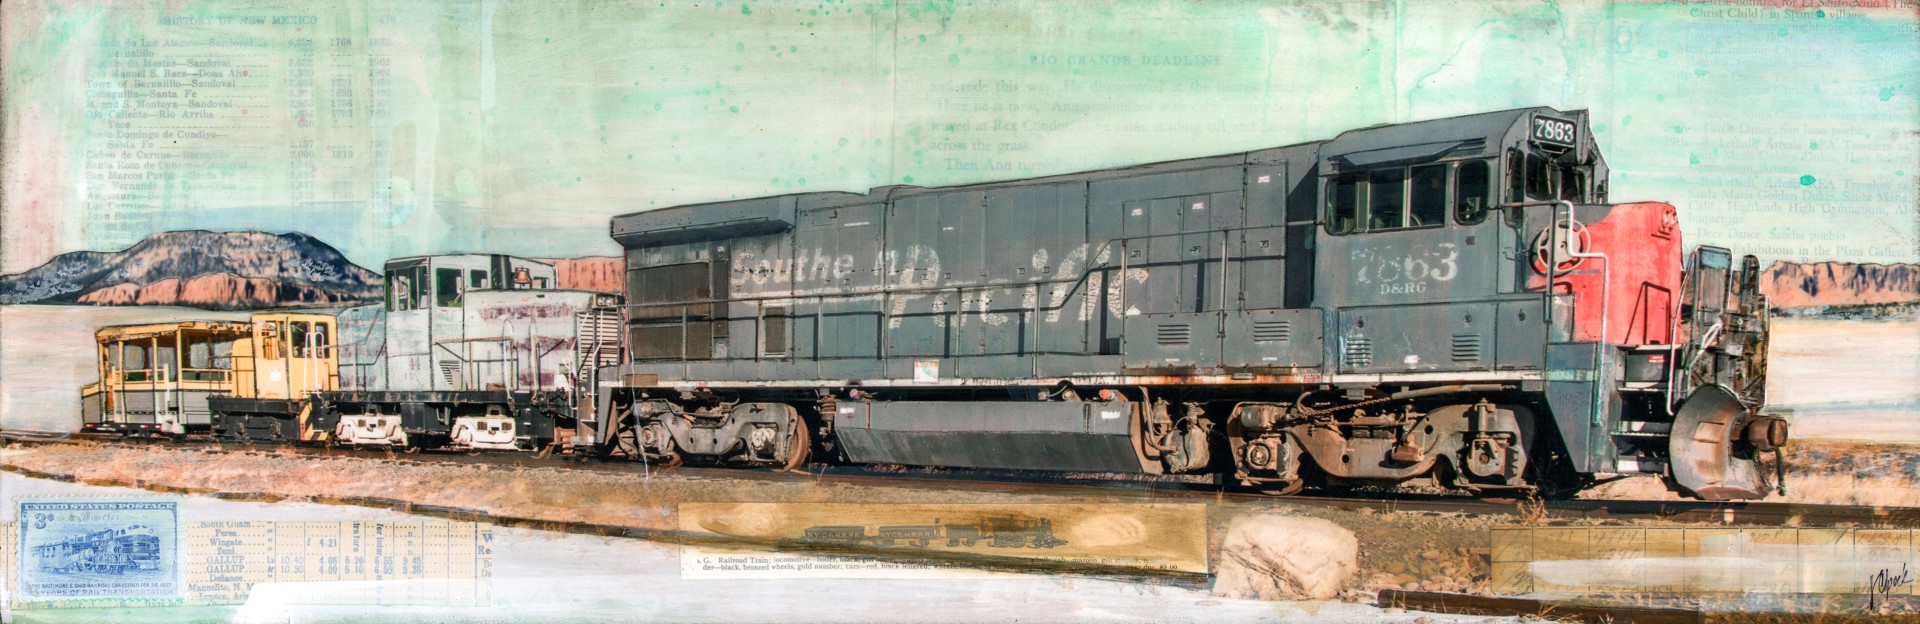 Southern Pacific by JC Spock